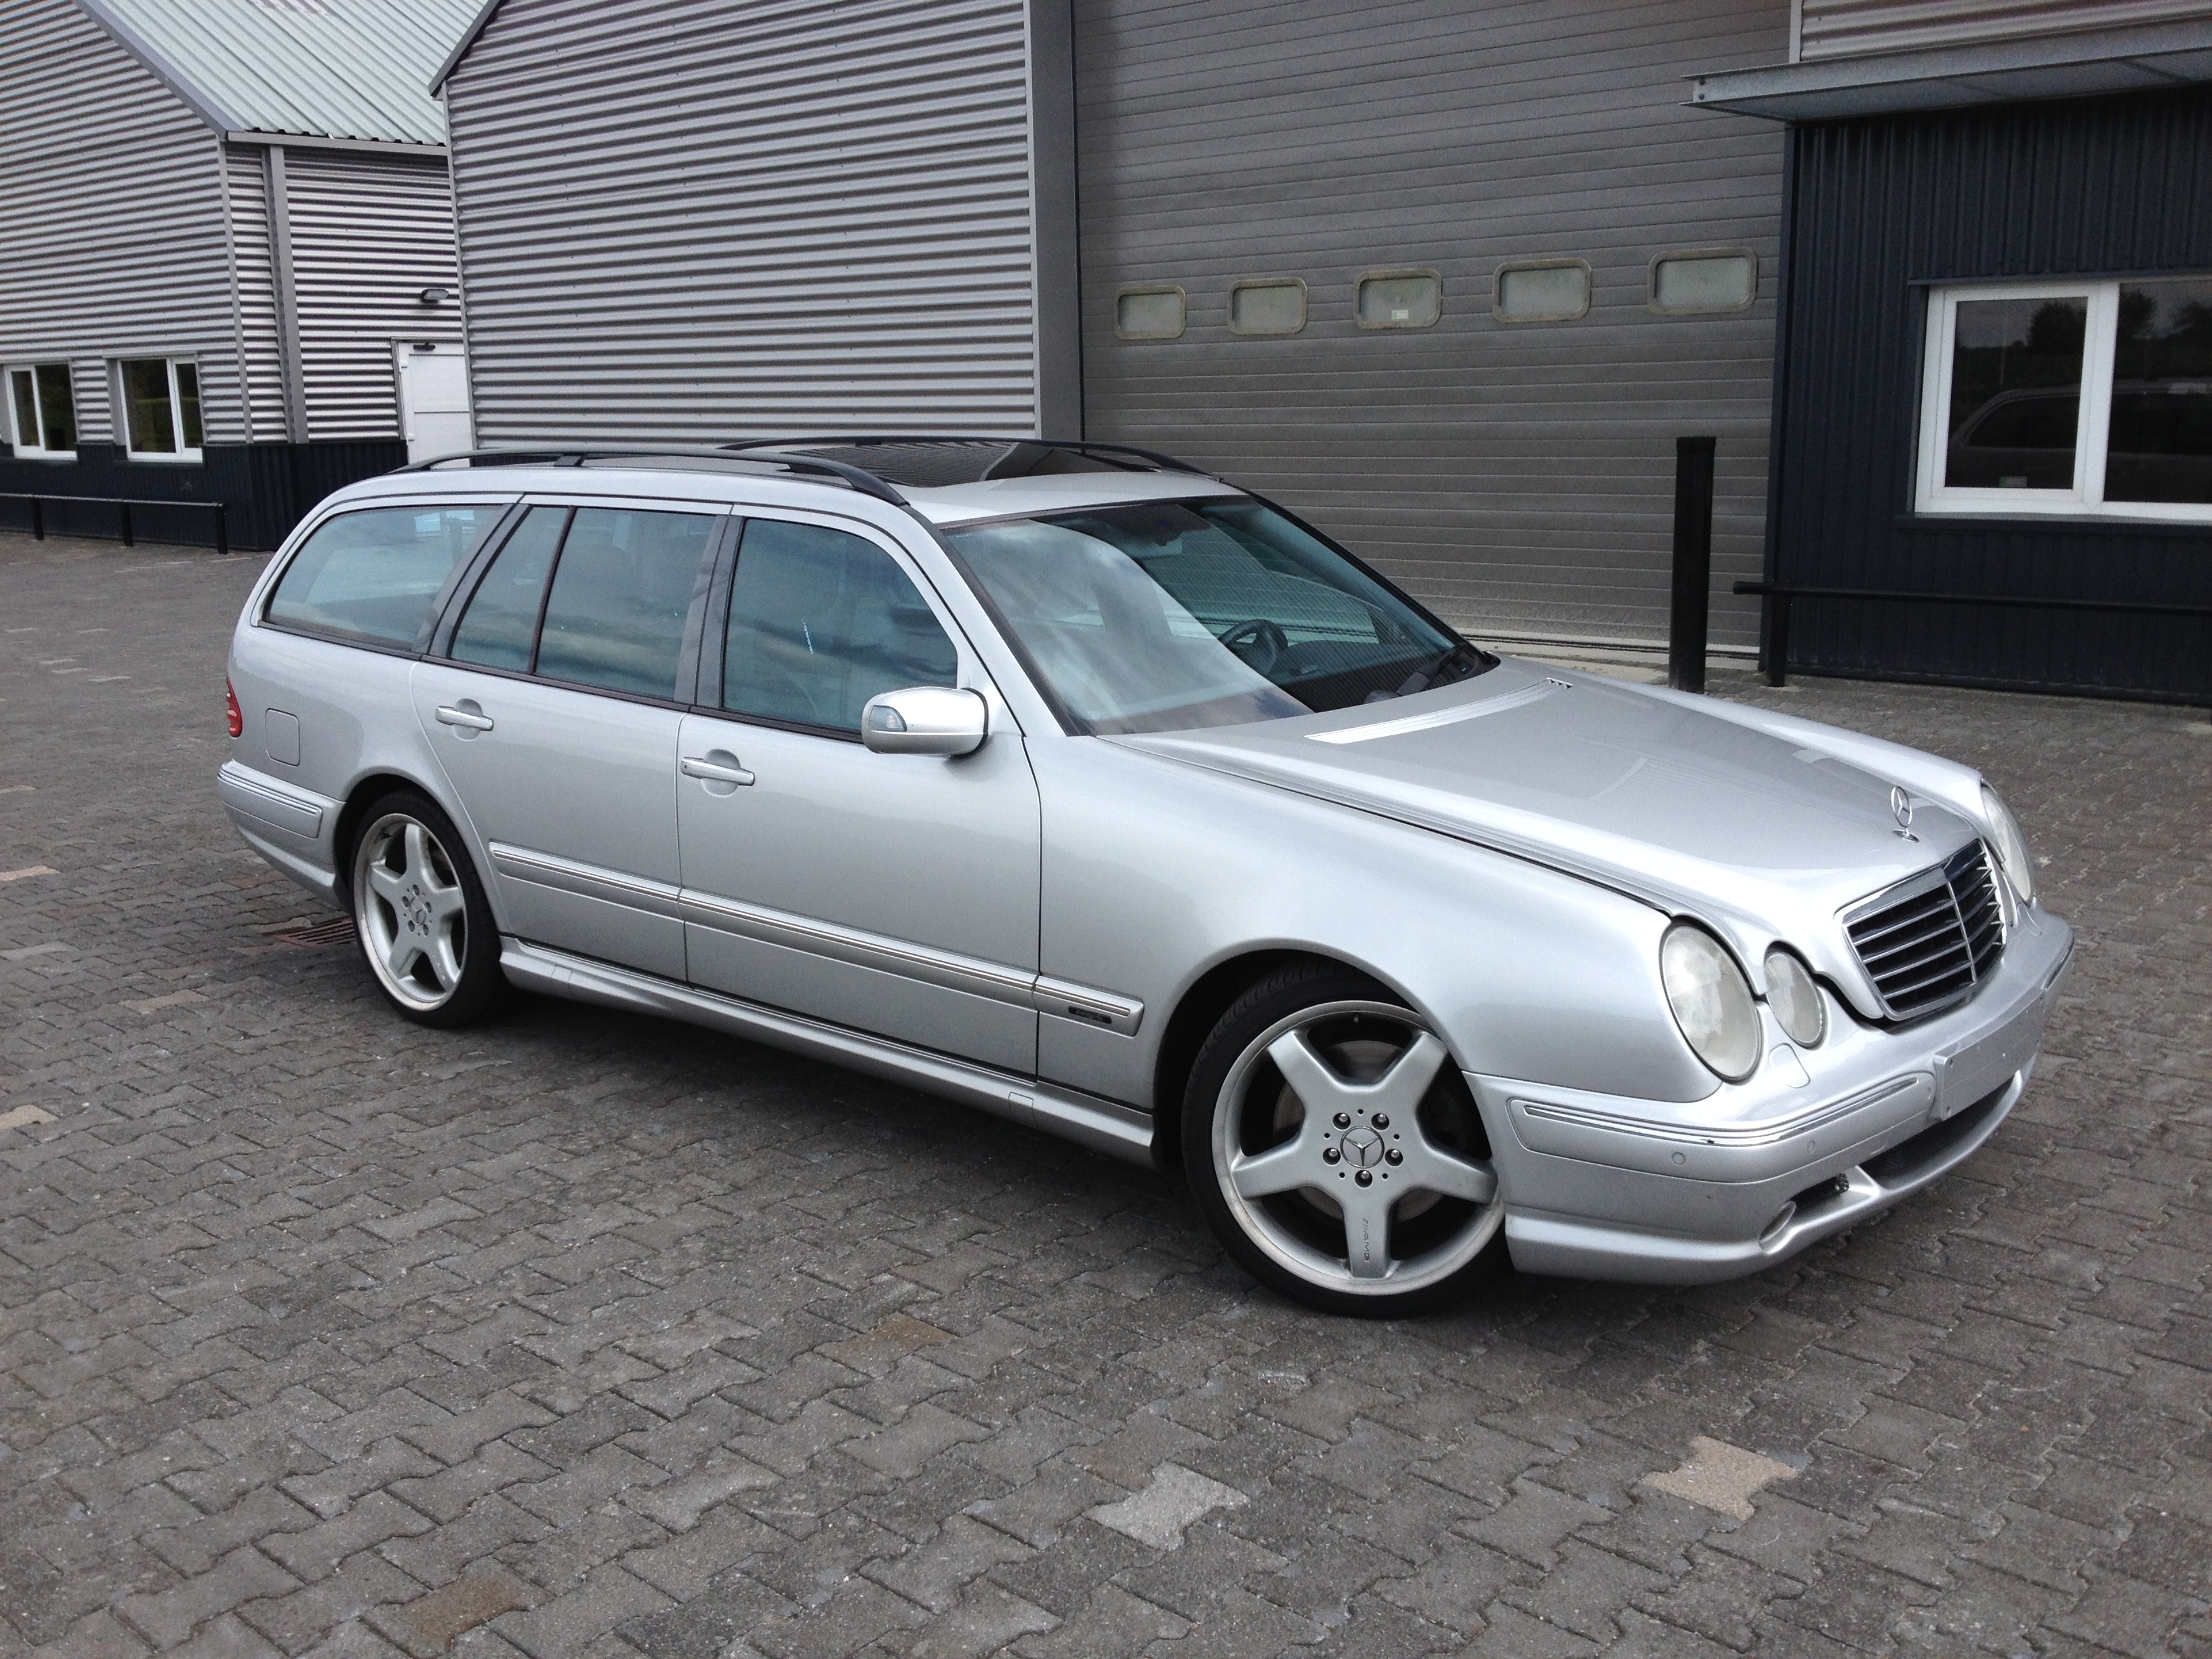 1999 Mercedes E55 Amg Estate Speed And Space Review Testdrive Jmspeedshop